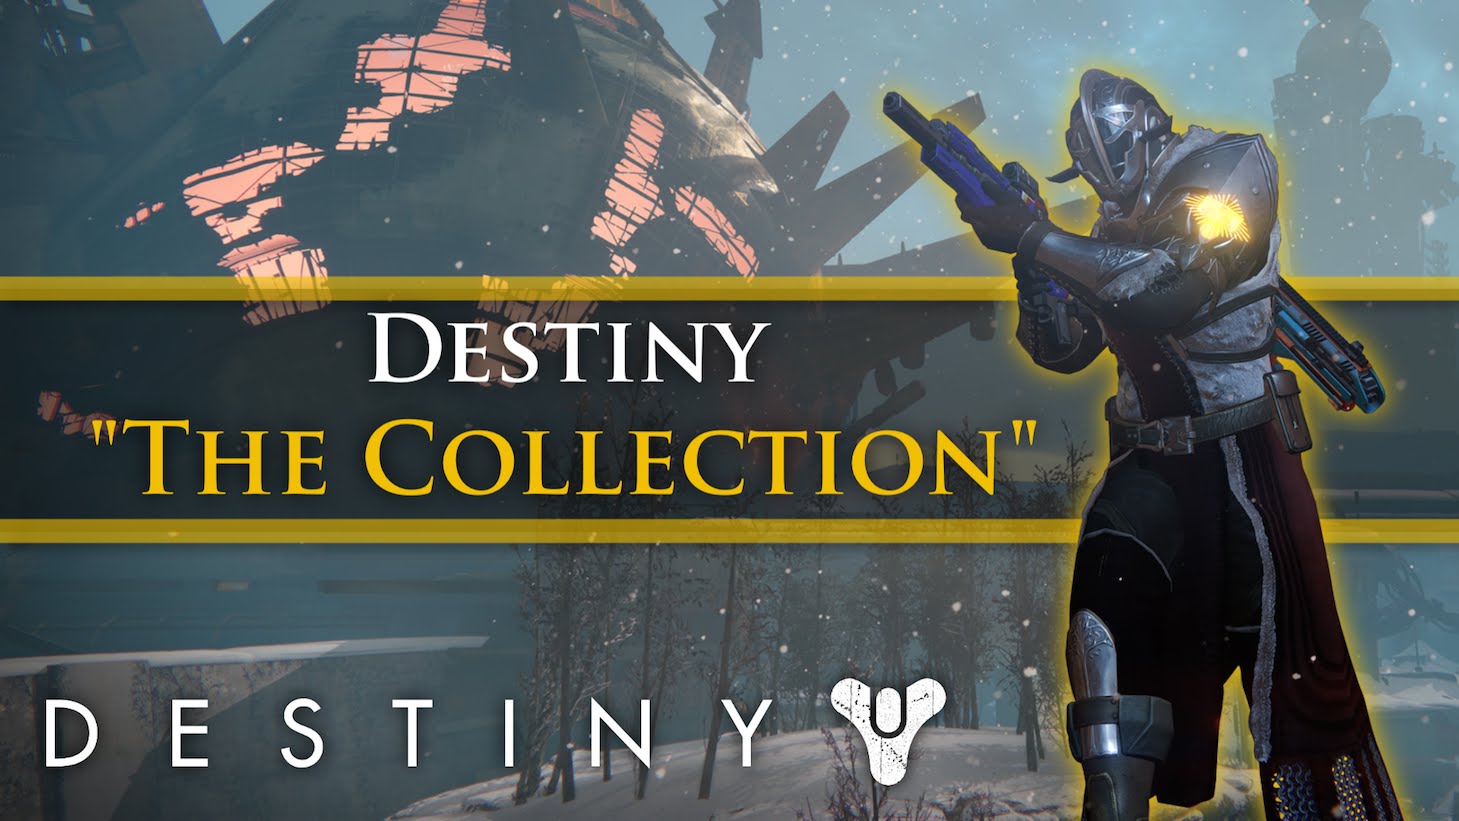 Destiny 2 legacy collection. Destiny the collection игра. Destiny the collection ps4. Destiny - the collection Xbox.